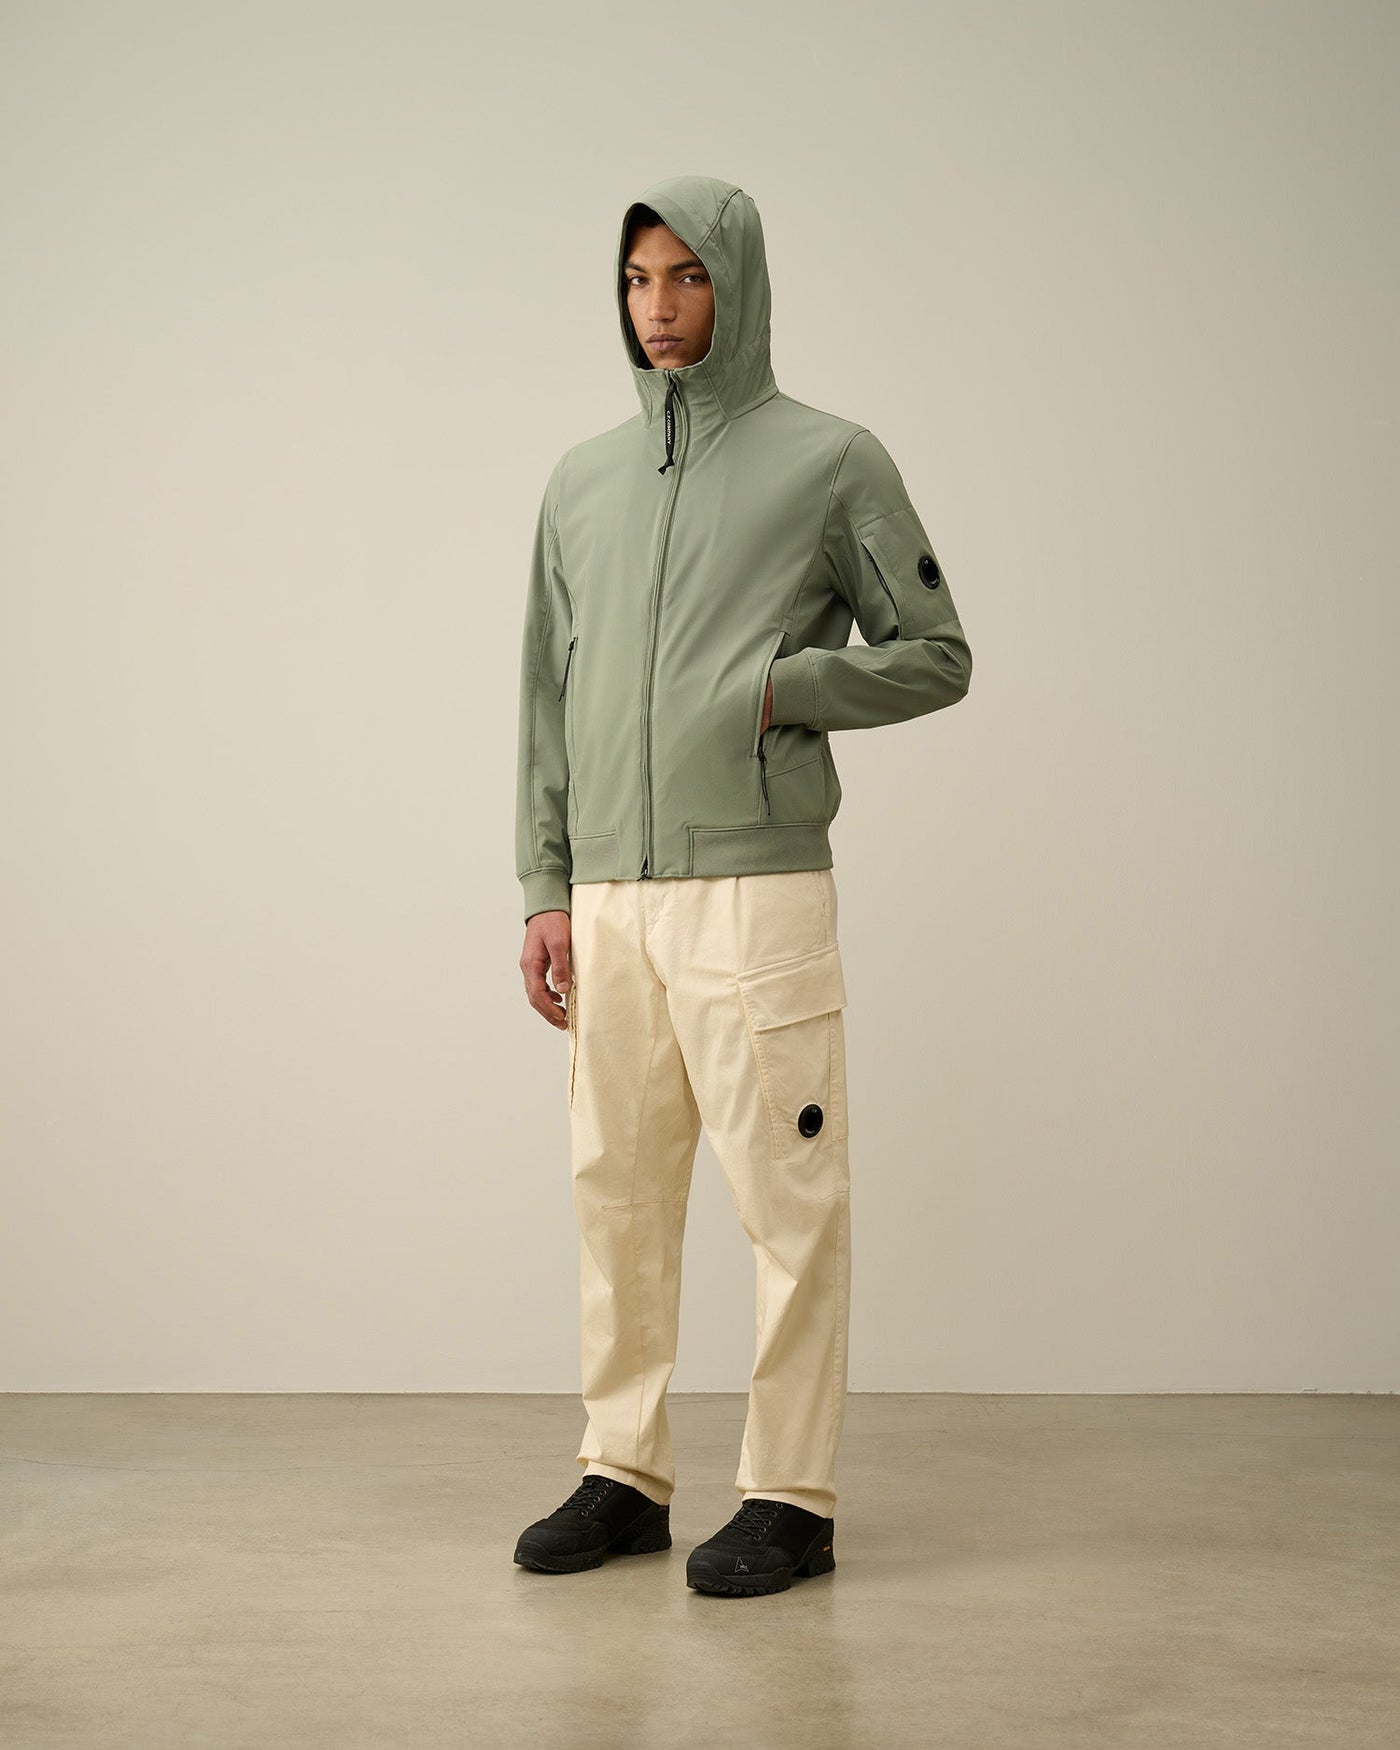 C.P Company - Veste Shell-R Agave Green - Lothaire